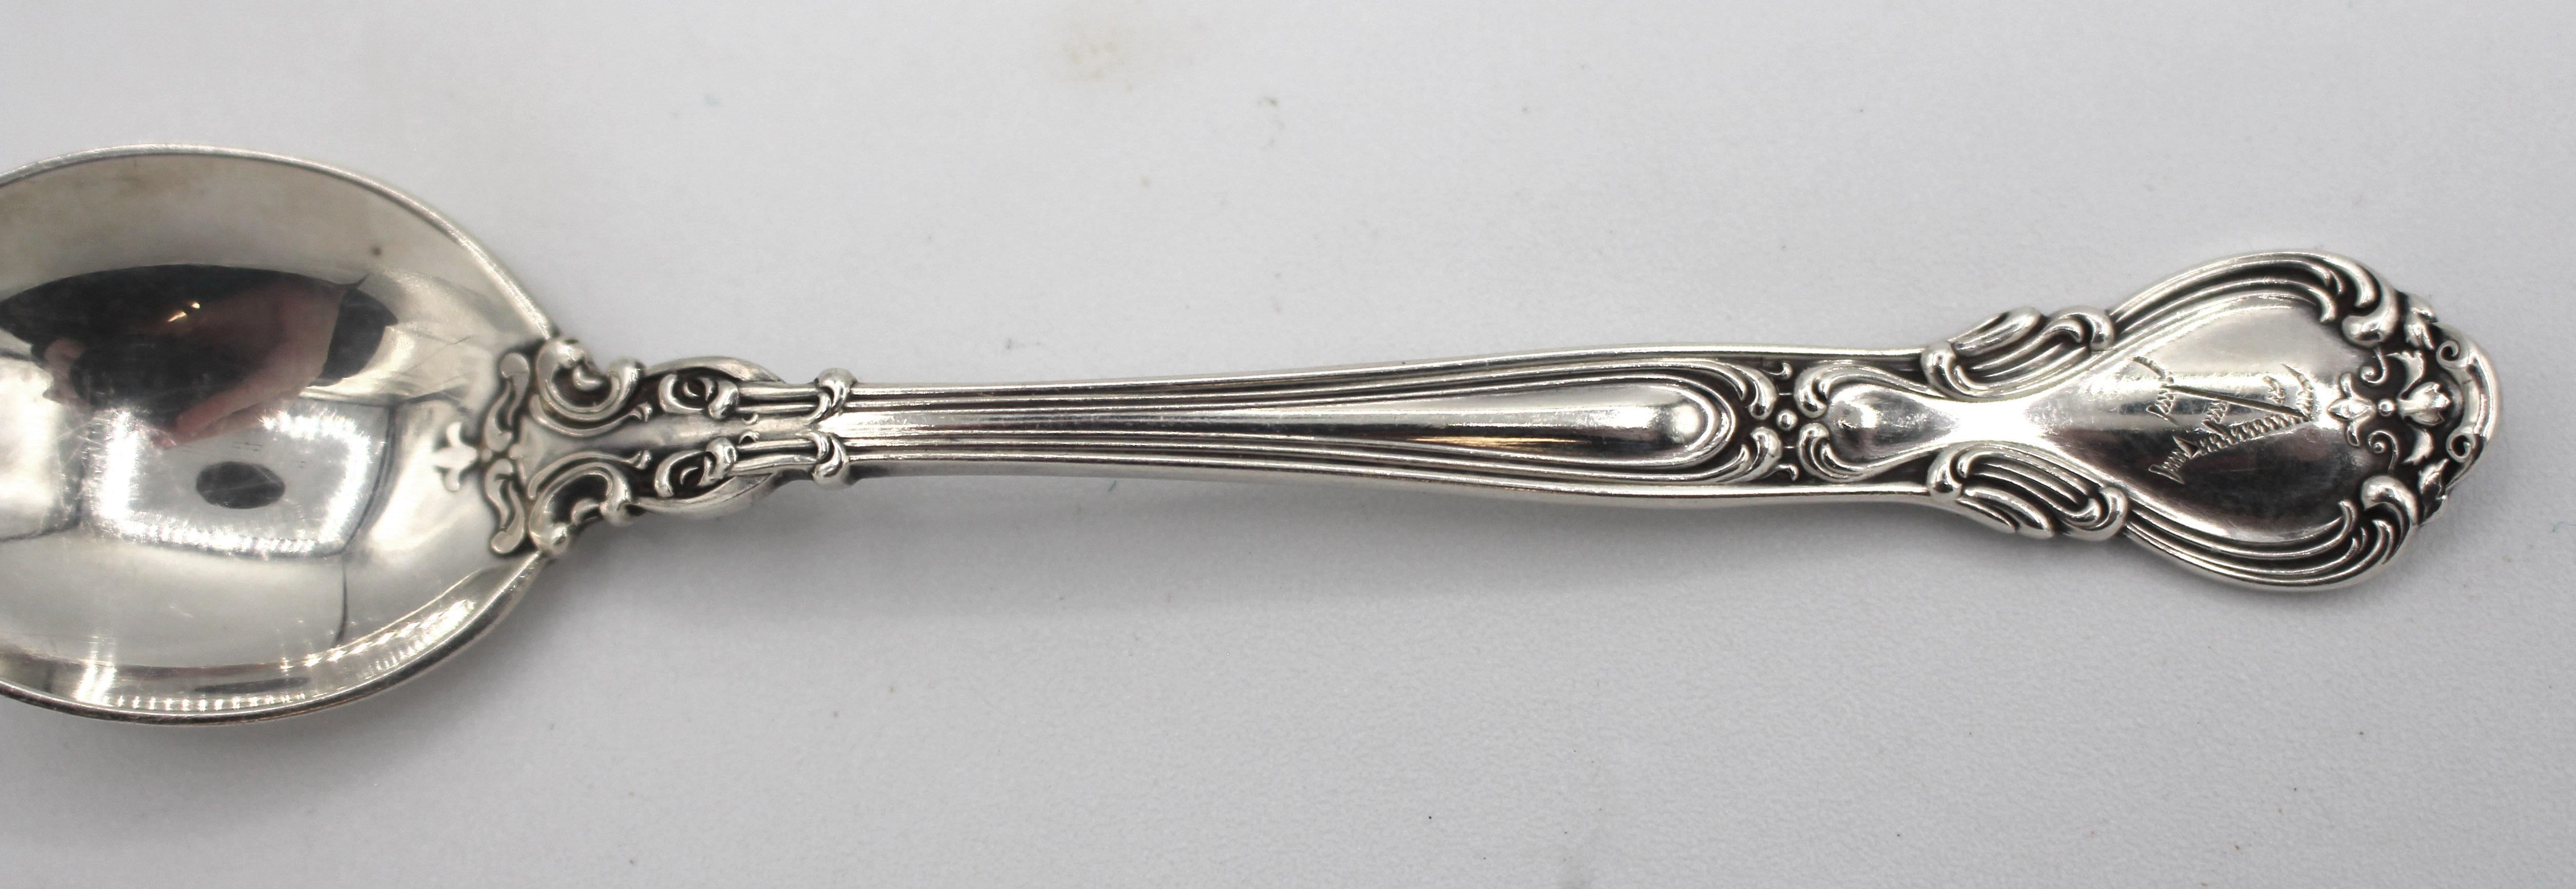 Set of 6 Chantilly pattern sterling silver chocolate spoons by Gorham. Pre-1950, 1895 patent design. Rarely found. Monogram 